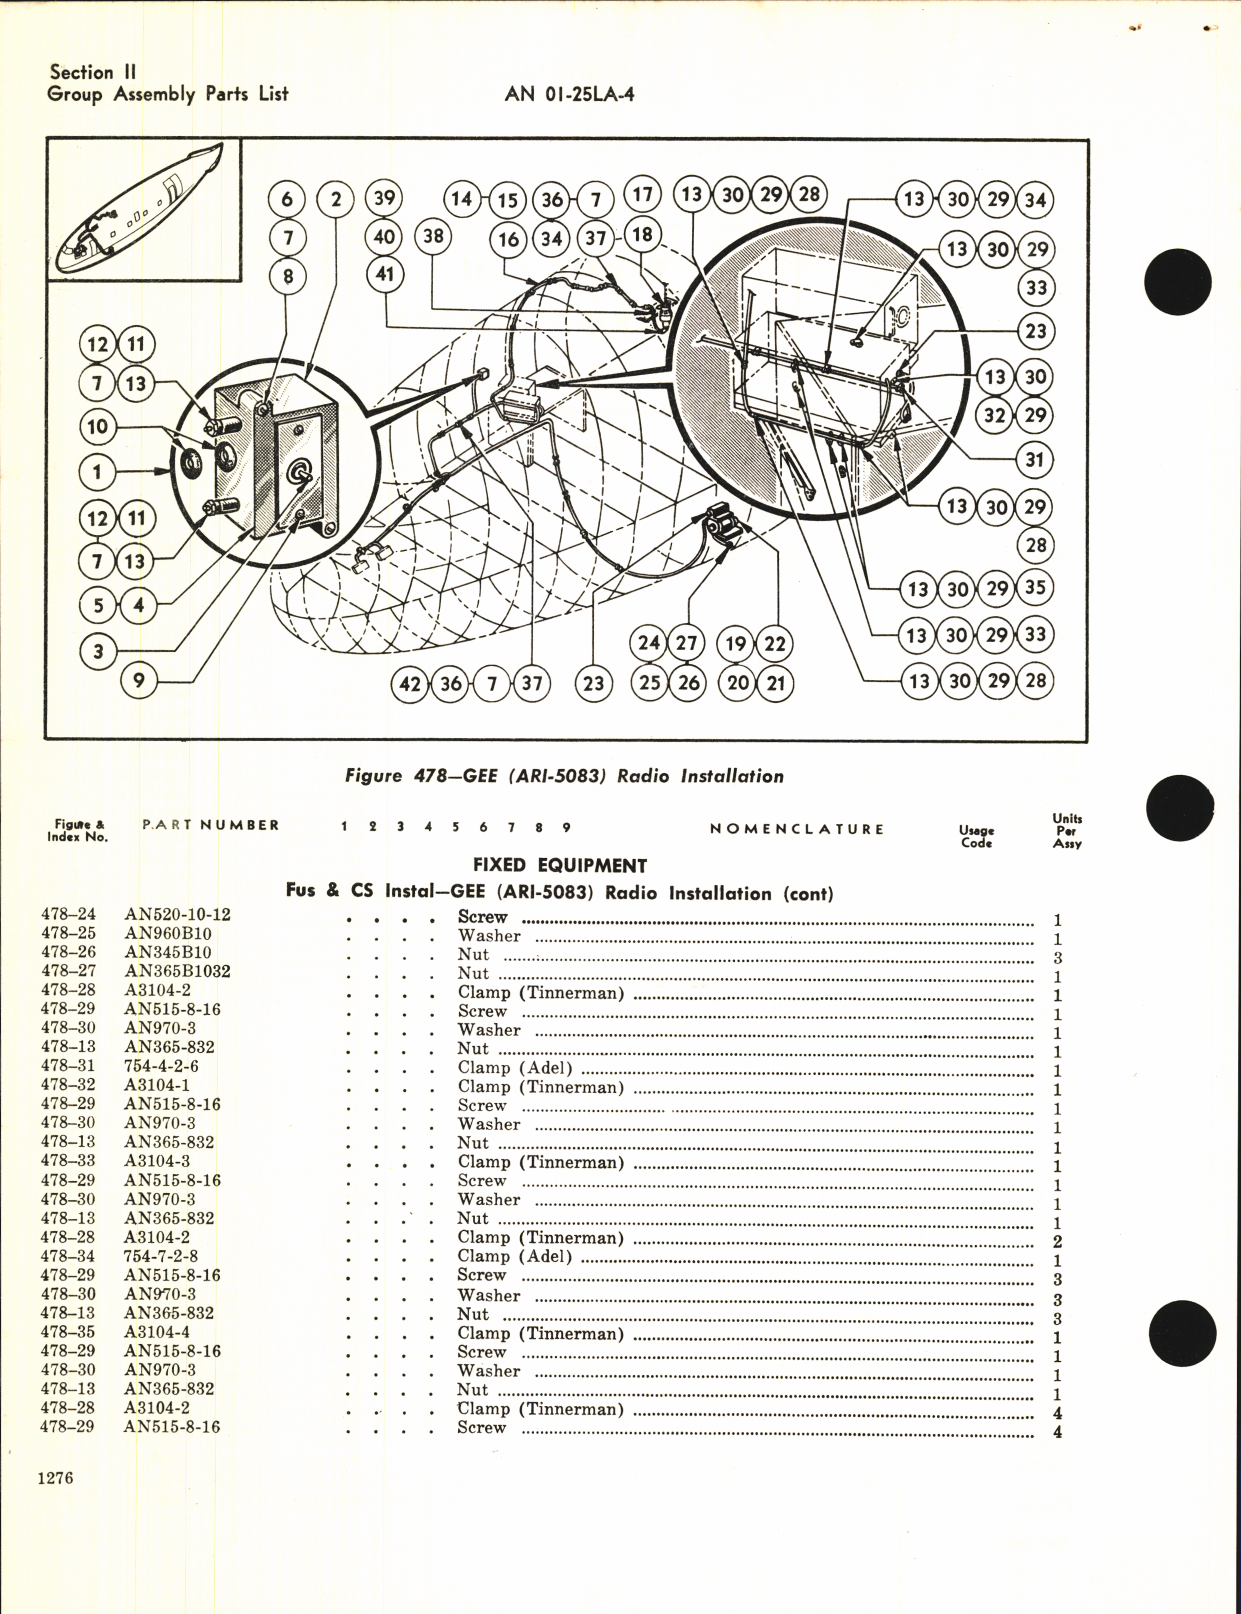 Sample page 8 from AirCorps Library document: Parts Catalog for C-46A, C-46D, and R5C-1